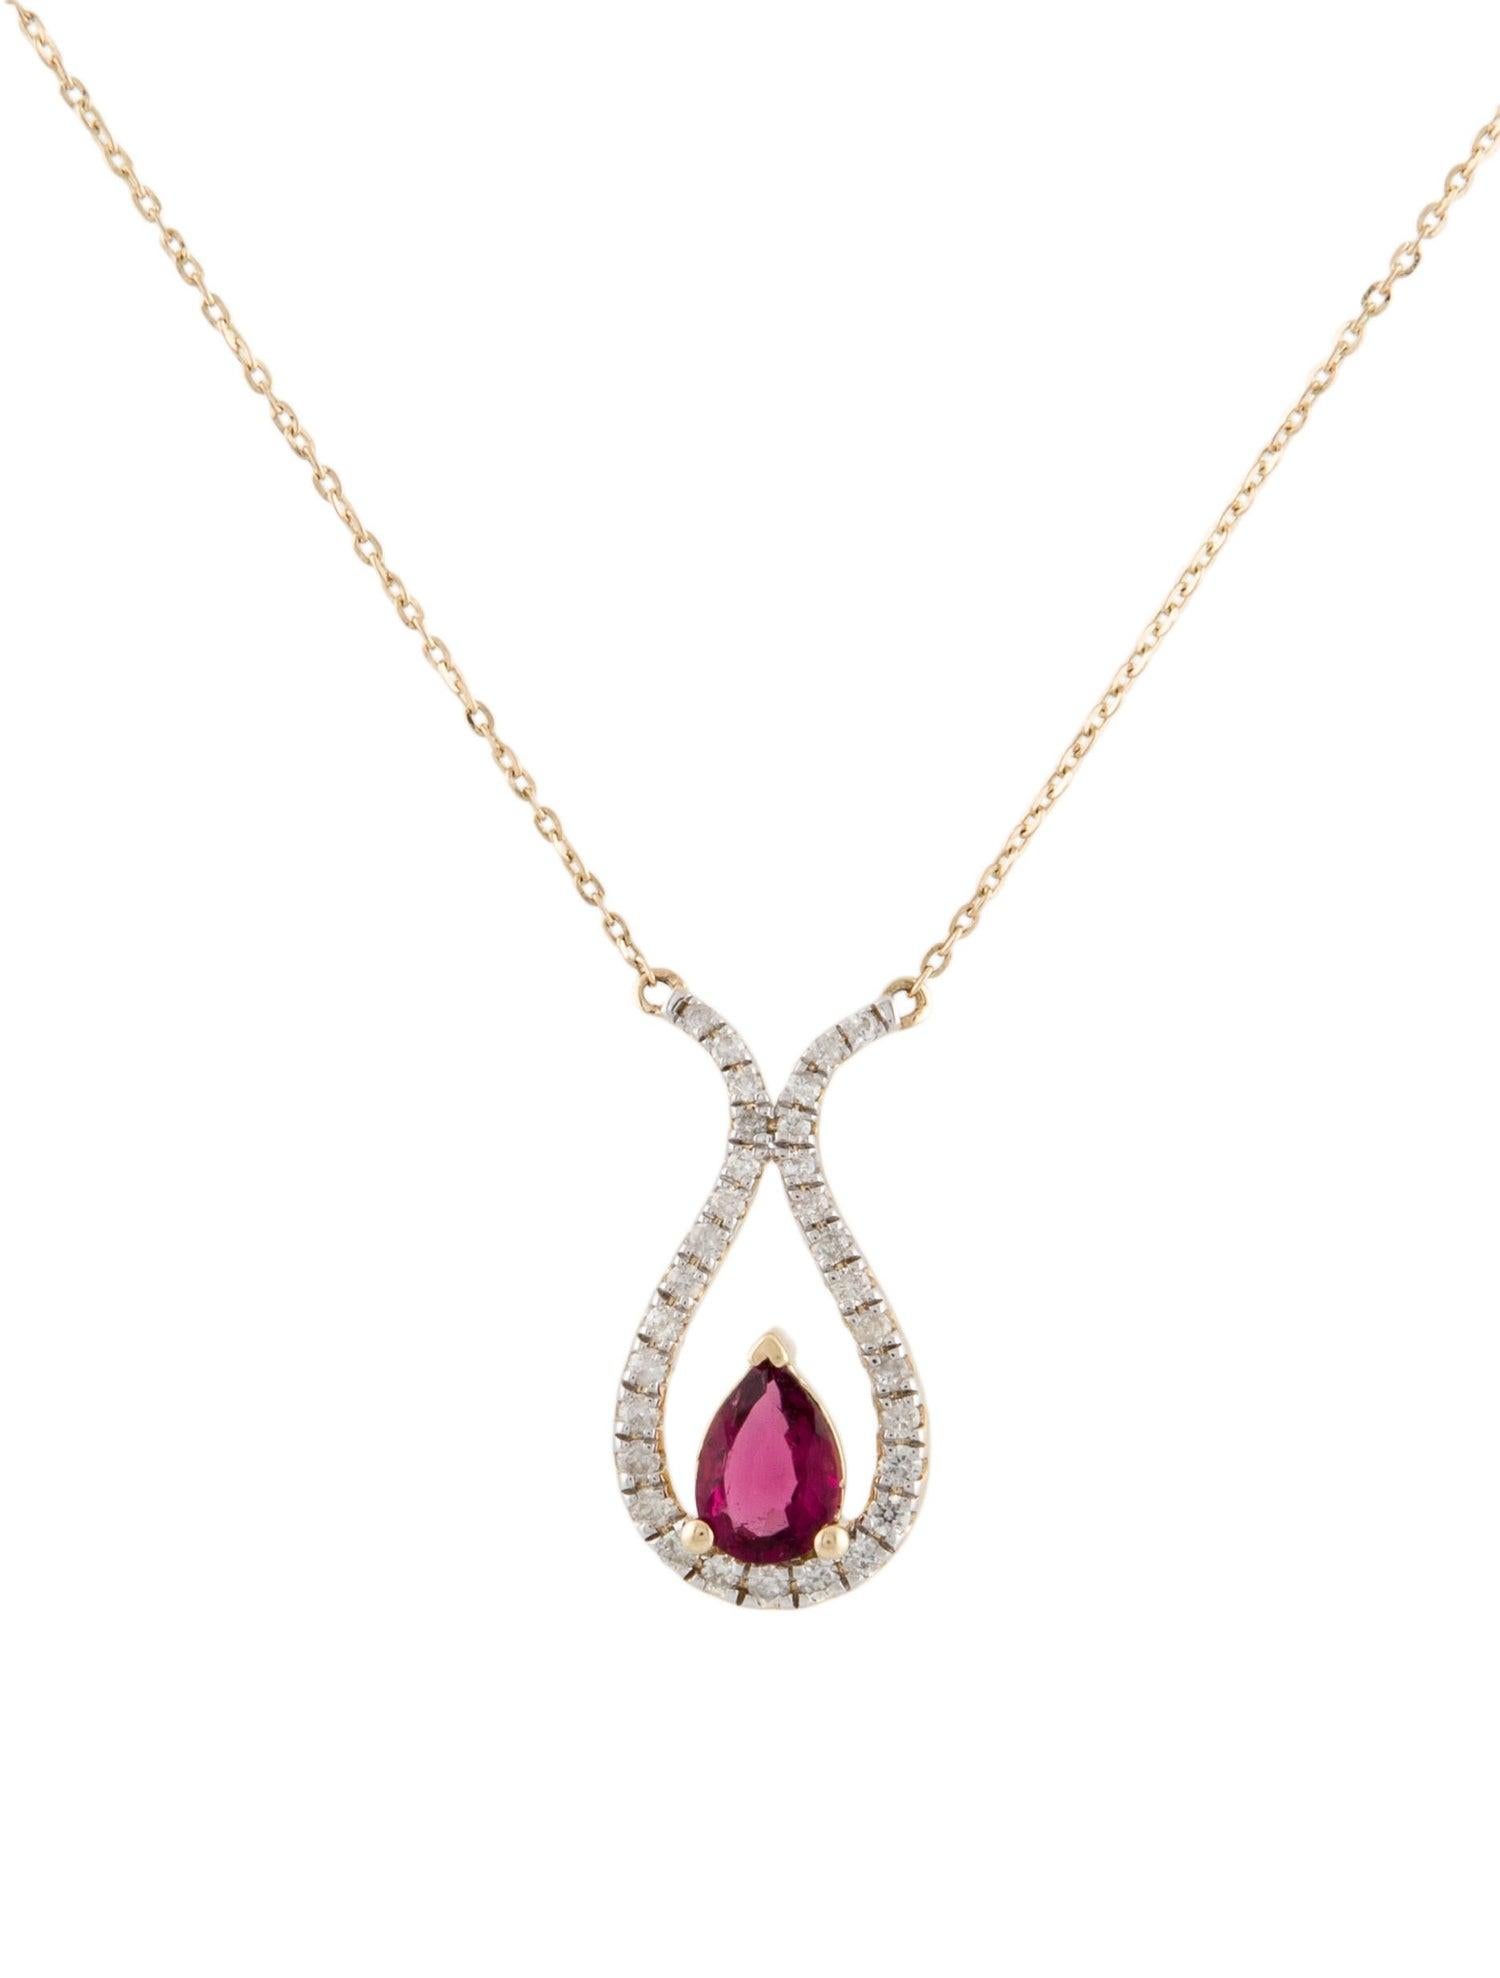 Elevate your style to new heights with our Blooms of Passion Ruby Lite and Diamond Pendant, a radiant masterpiece inspired by the fiery depths of passion and the vibrant beauty of nature. Crafted with meticulous attention to detail and set in